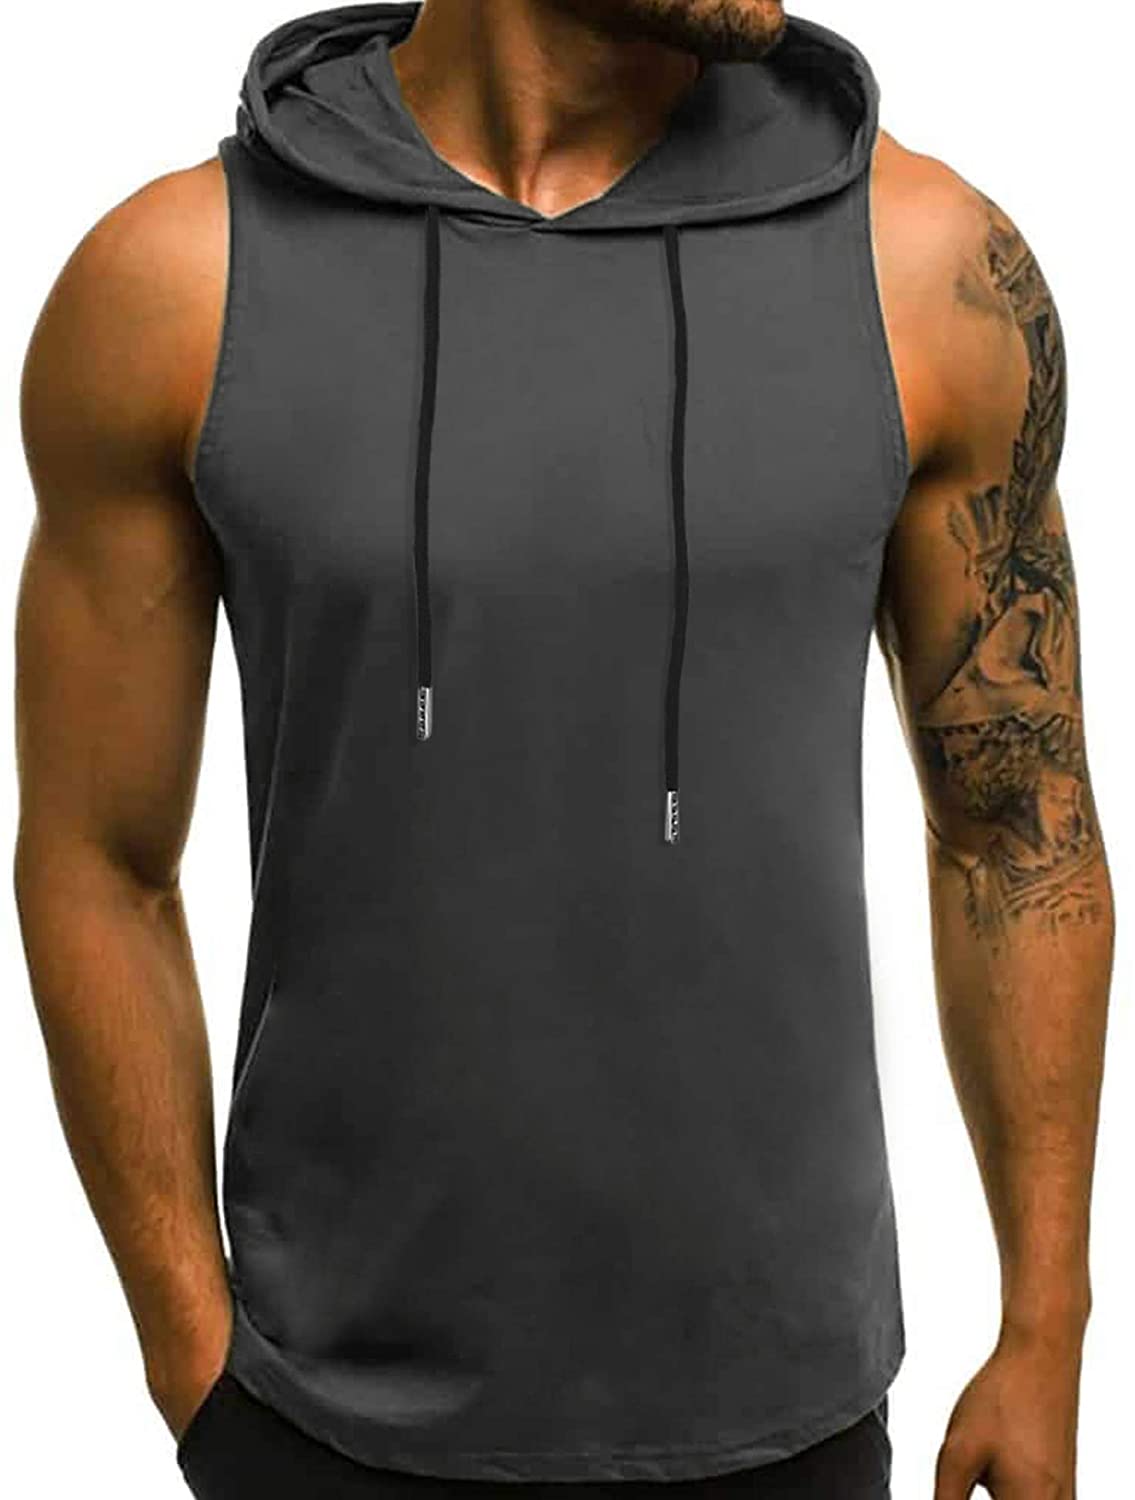 Babioboa Men's Workout Hooded Tank Tops Sleeveless Gym Hoodies Bodybuilding Muscle Shirts